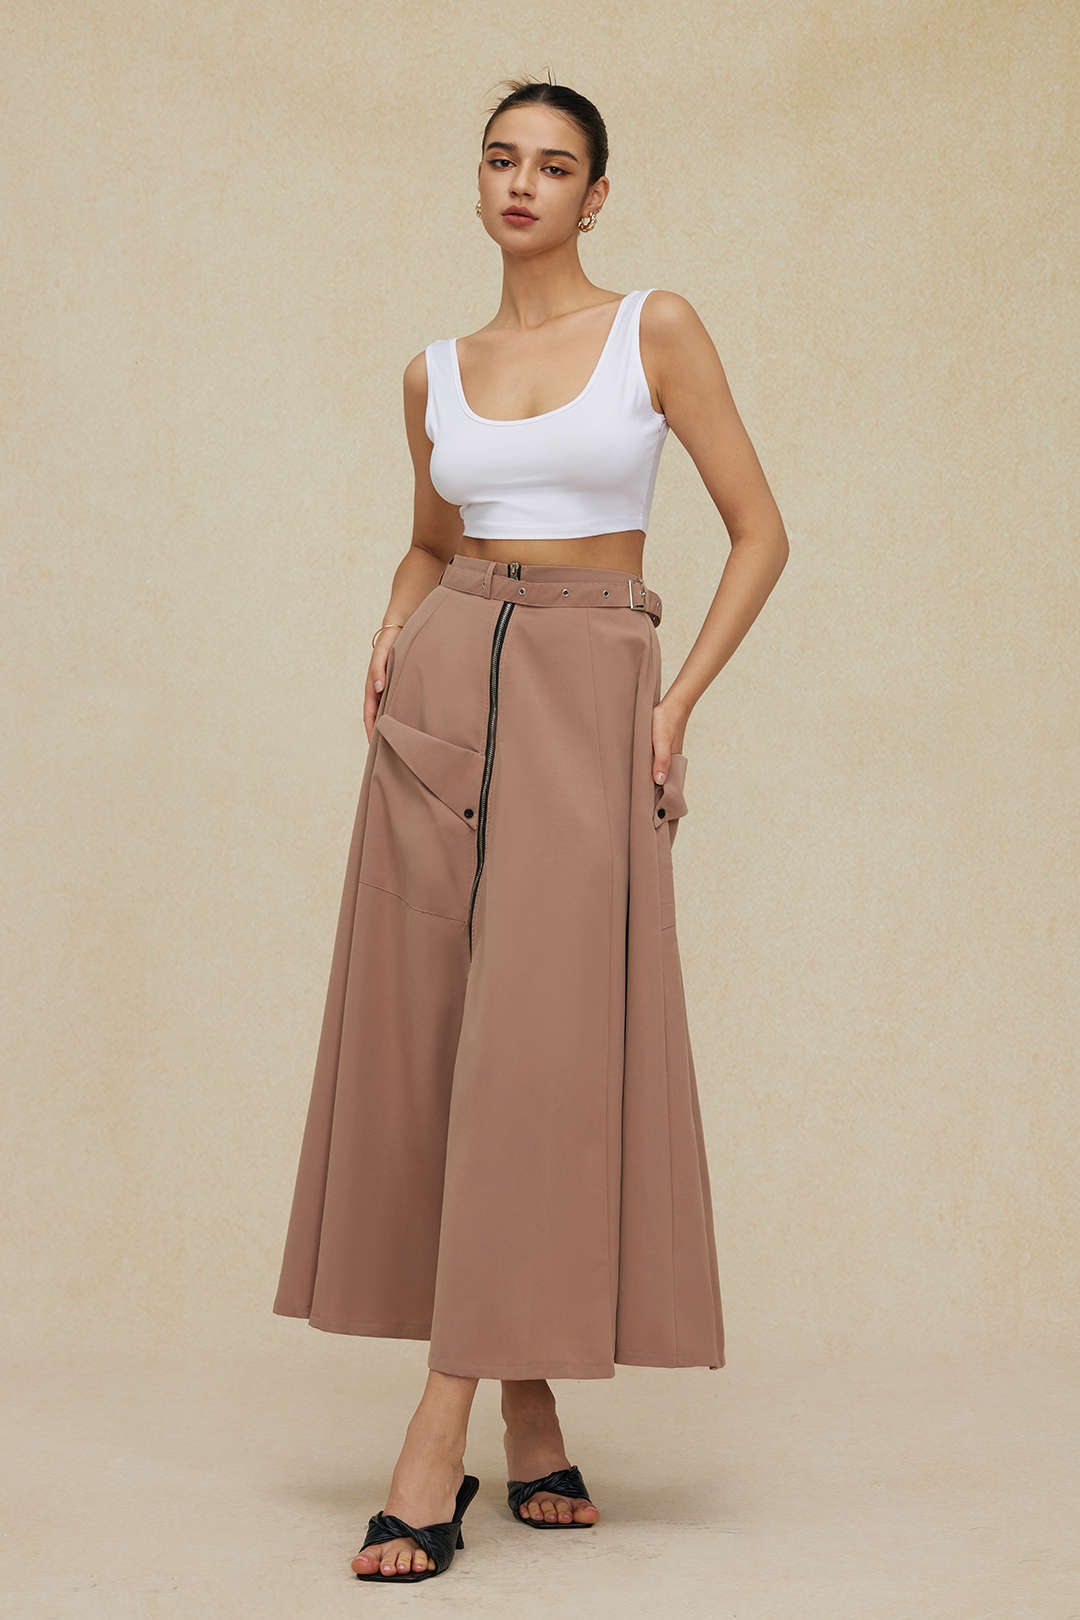 Solid Crop Tank Top And Zipper Pocket Pleated Skirt Set